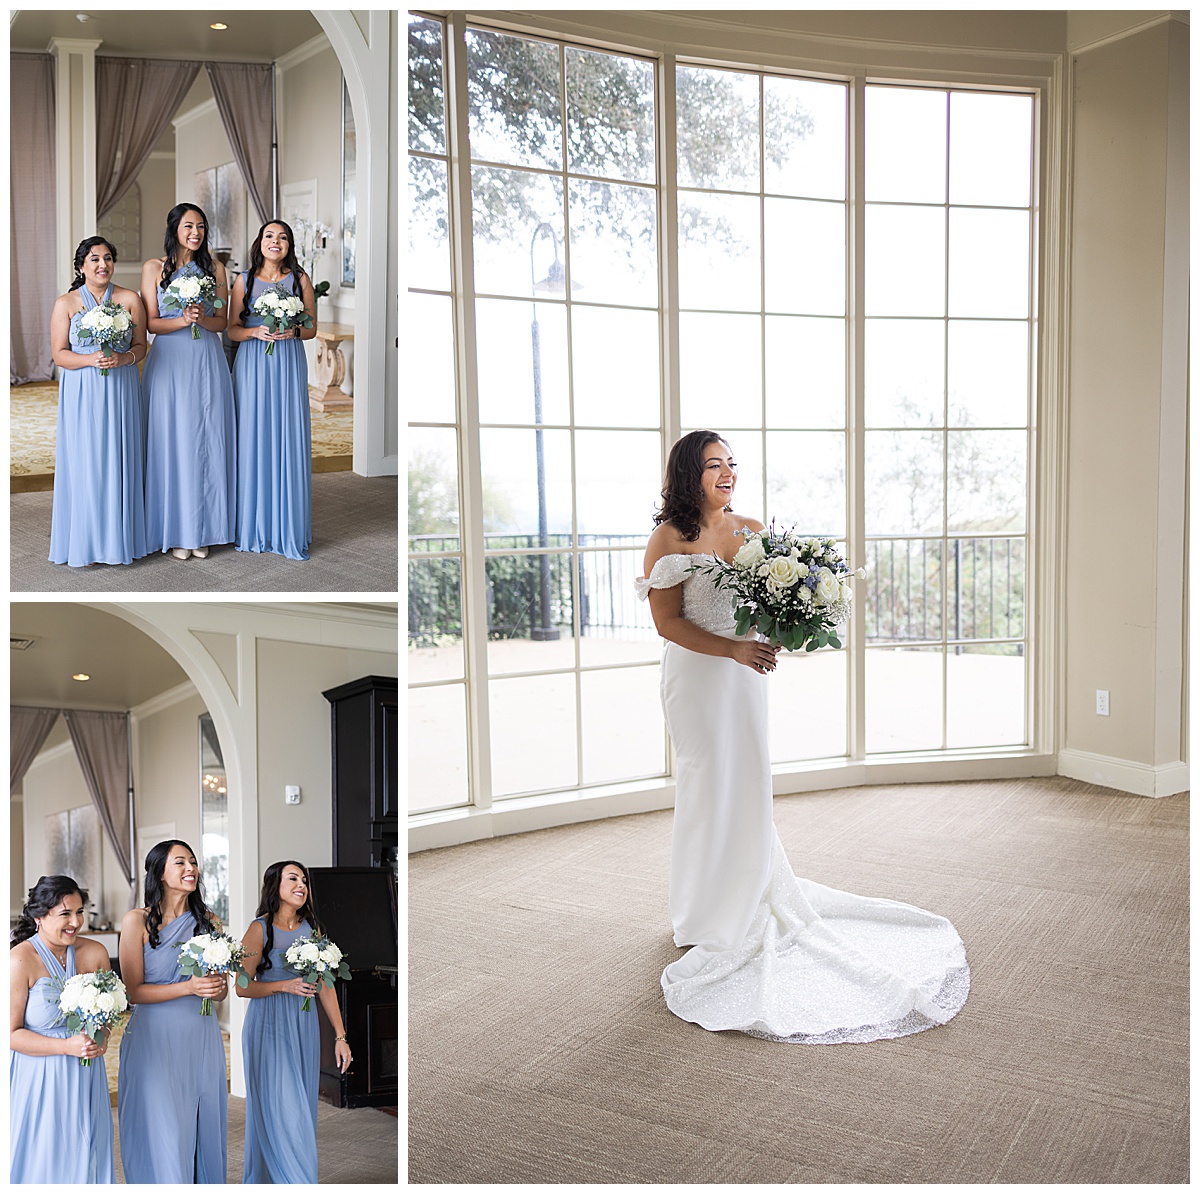 Bridesmaids see bride for the first time by Houston’s Best Wedding Photographers